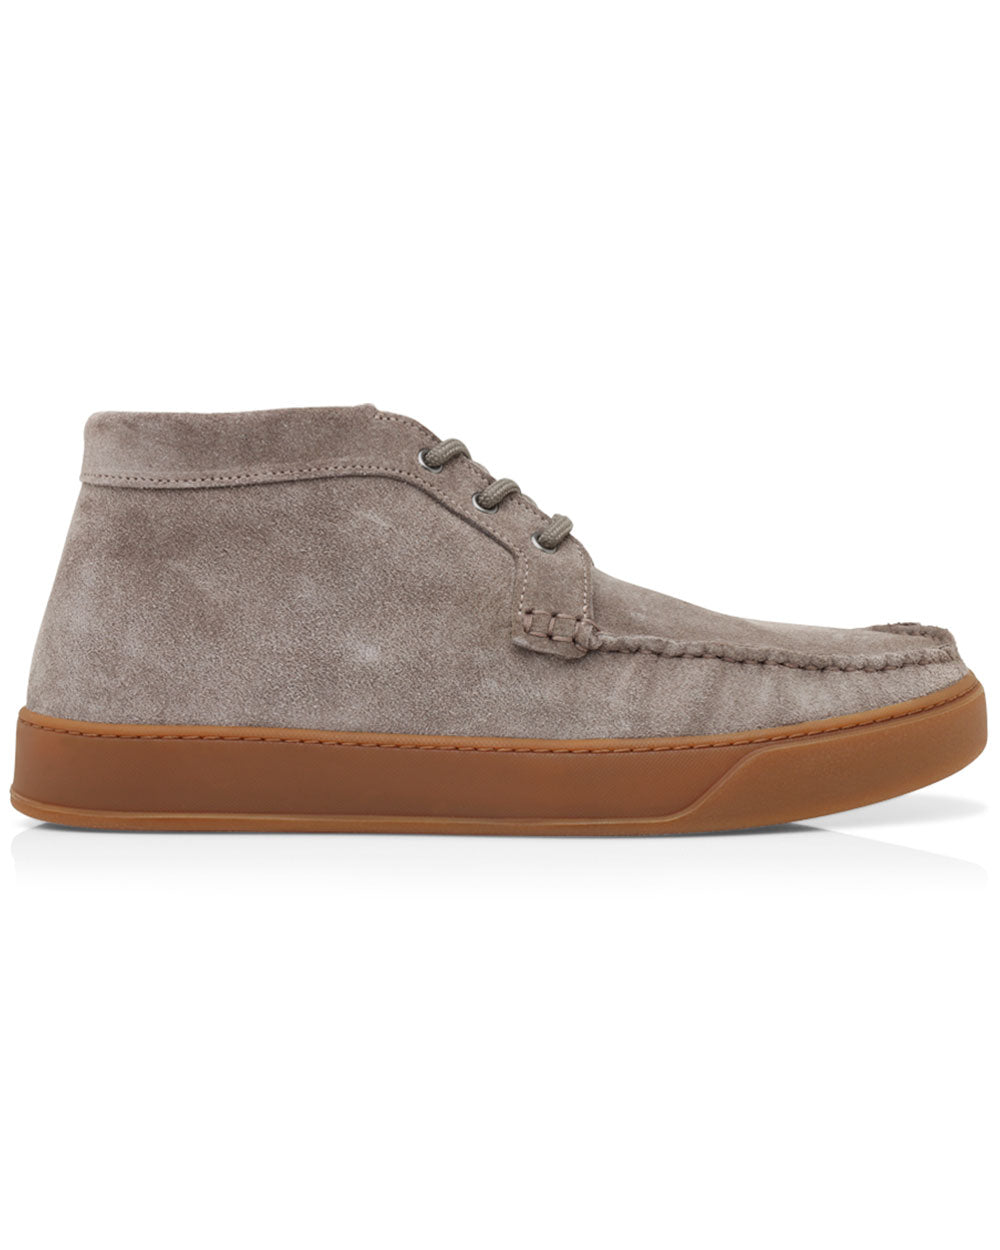 Suede Haldon Short Boot in Taupe